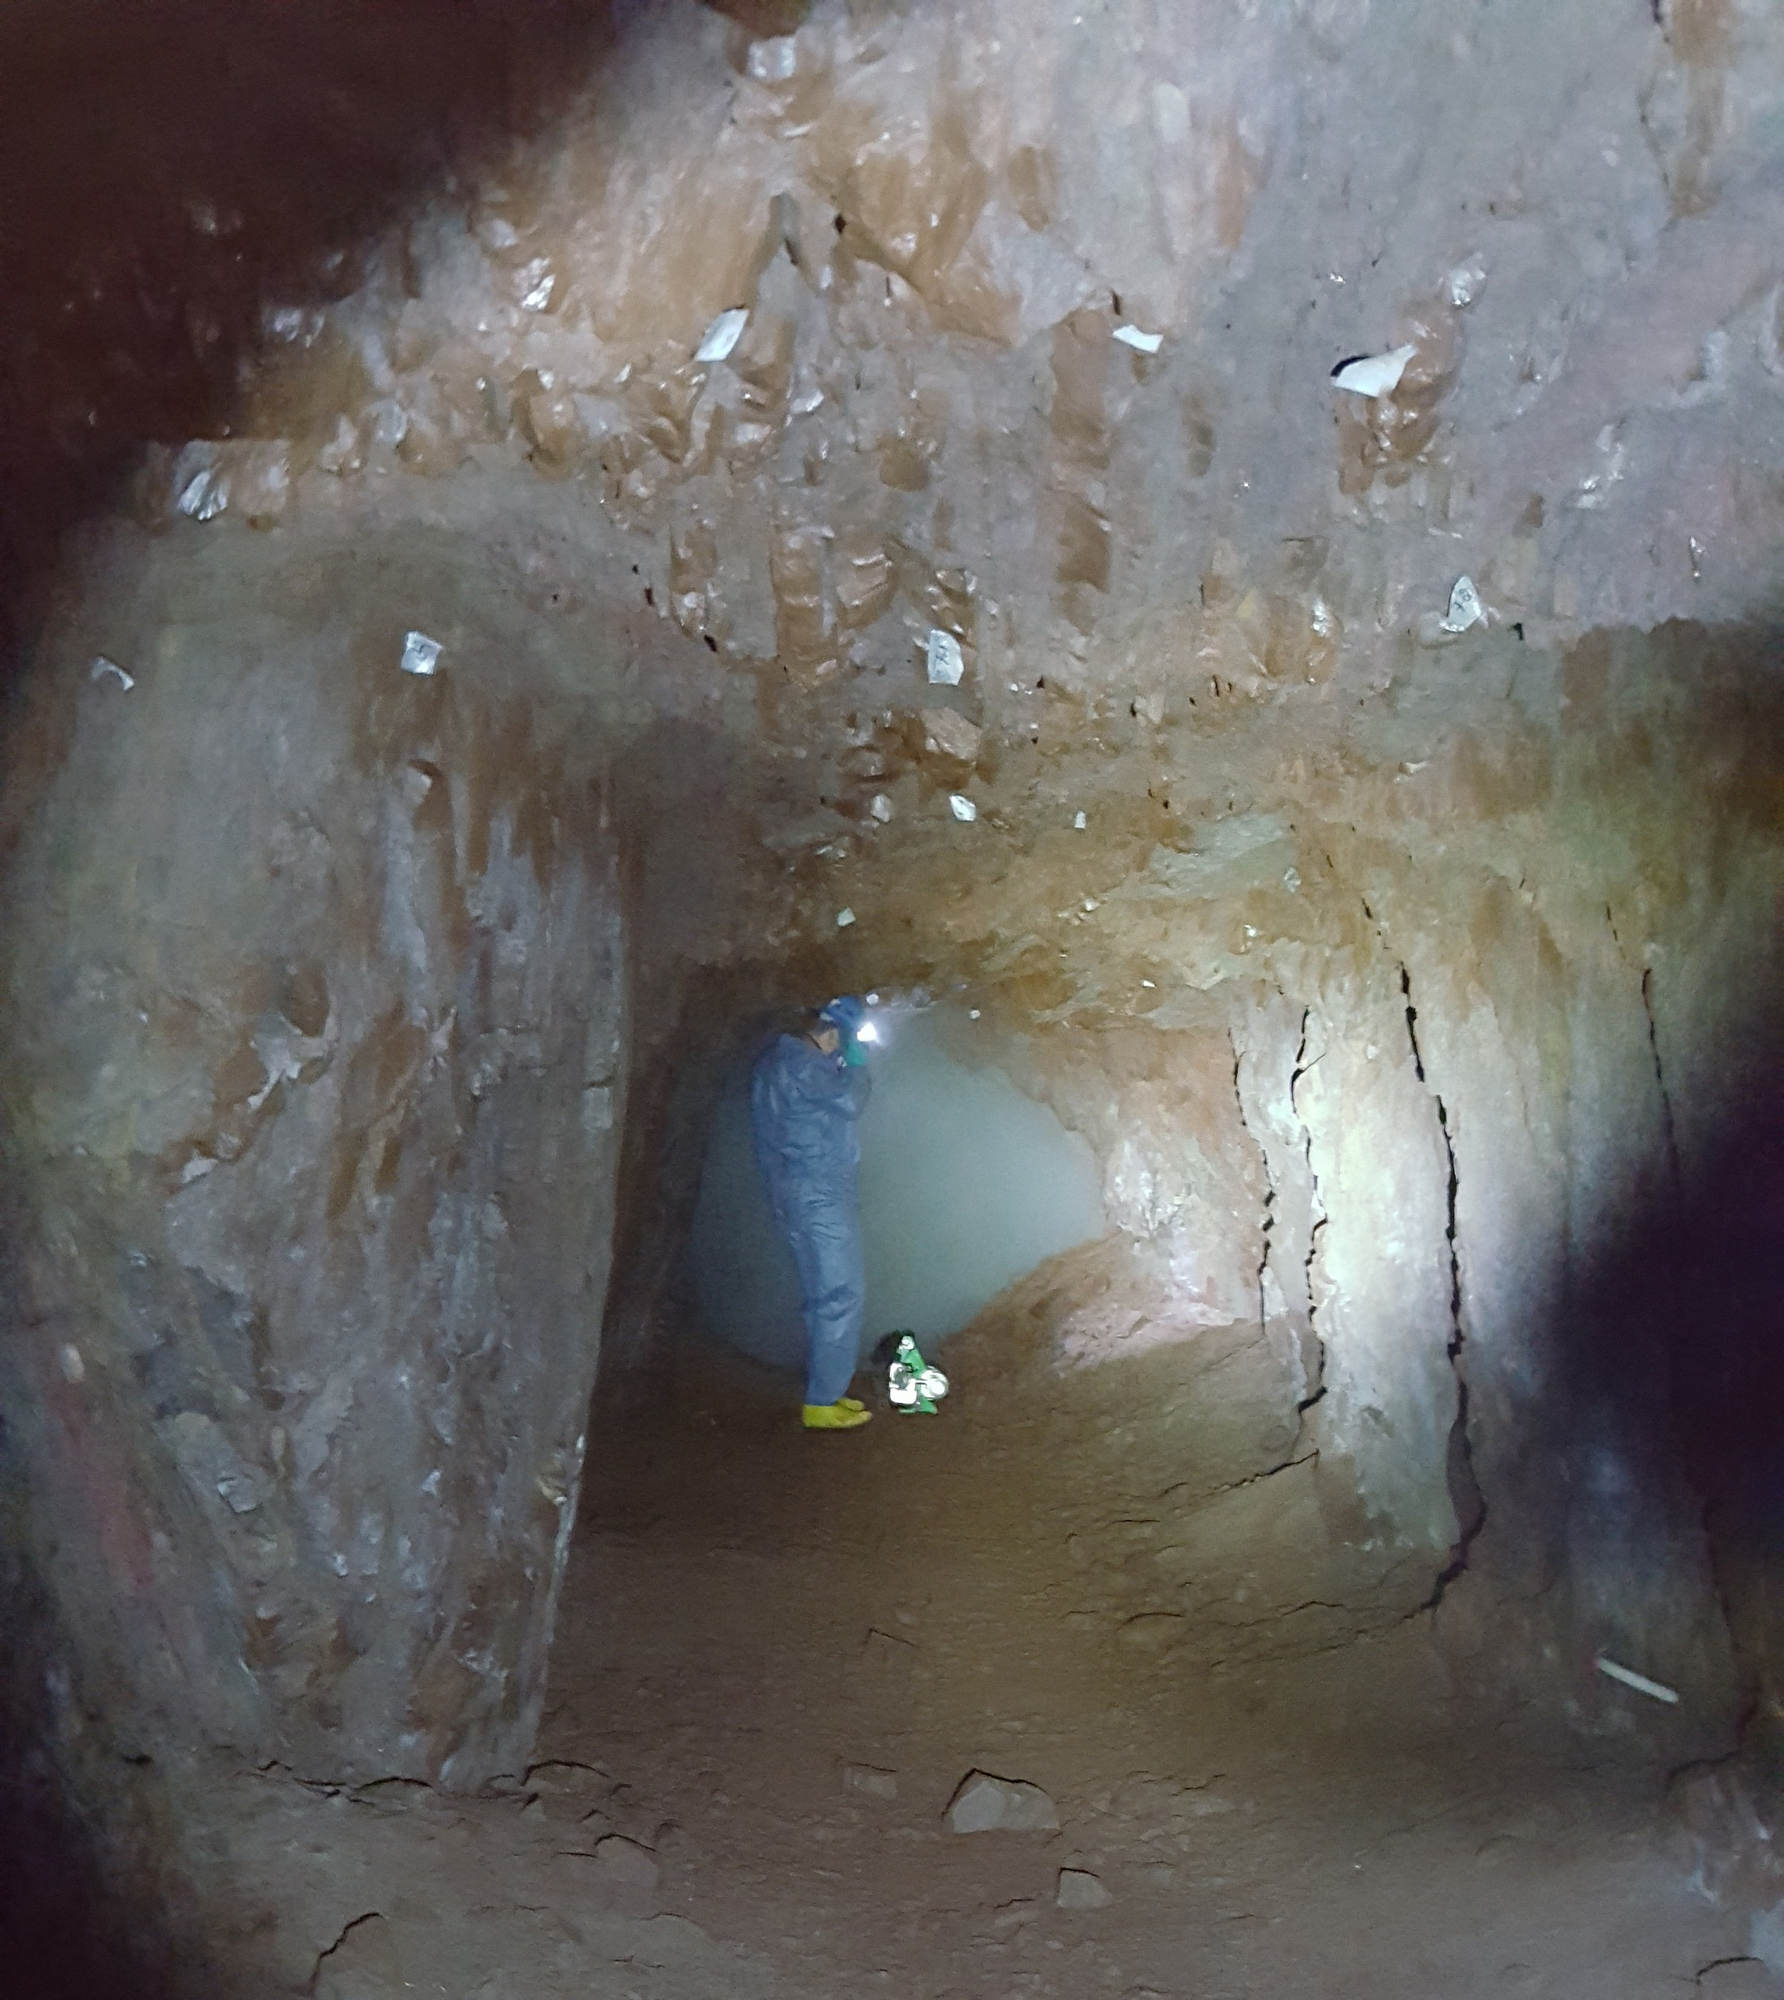 Chlorine dioxide fog, shown here in a Dickinson County mine, is used to kill fungal spores throughout a mine during the summer.